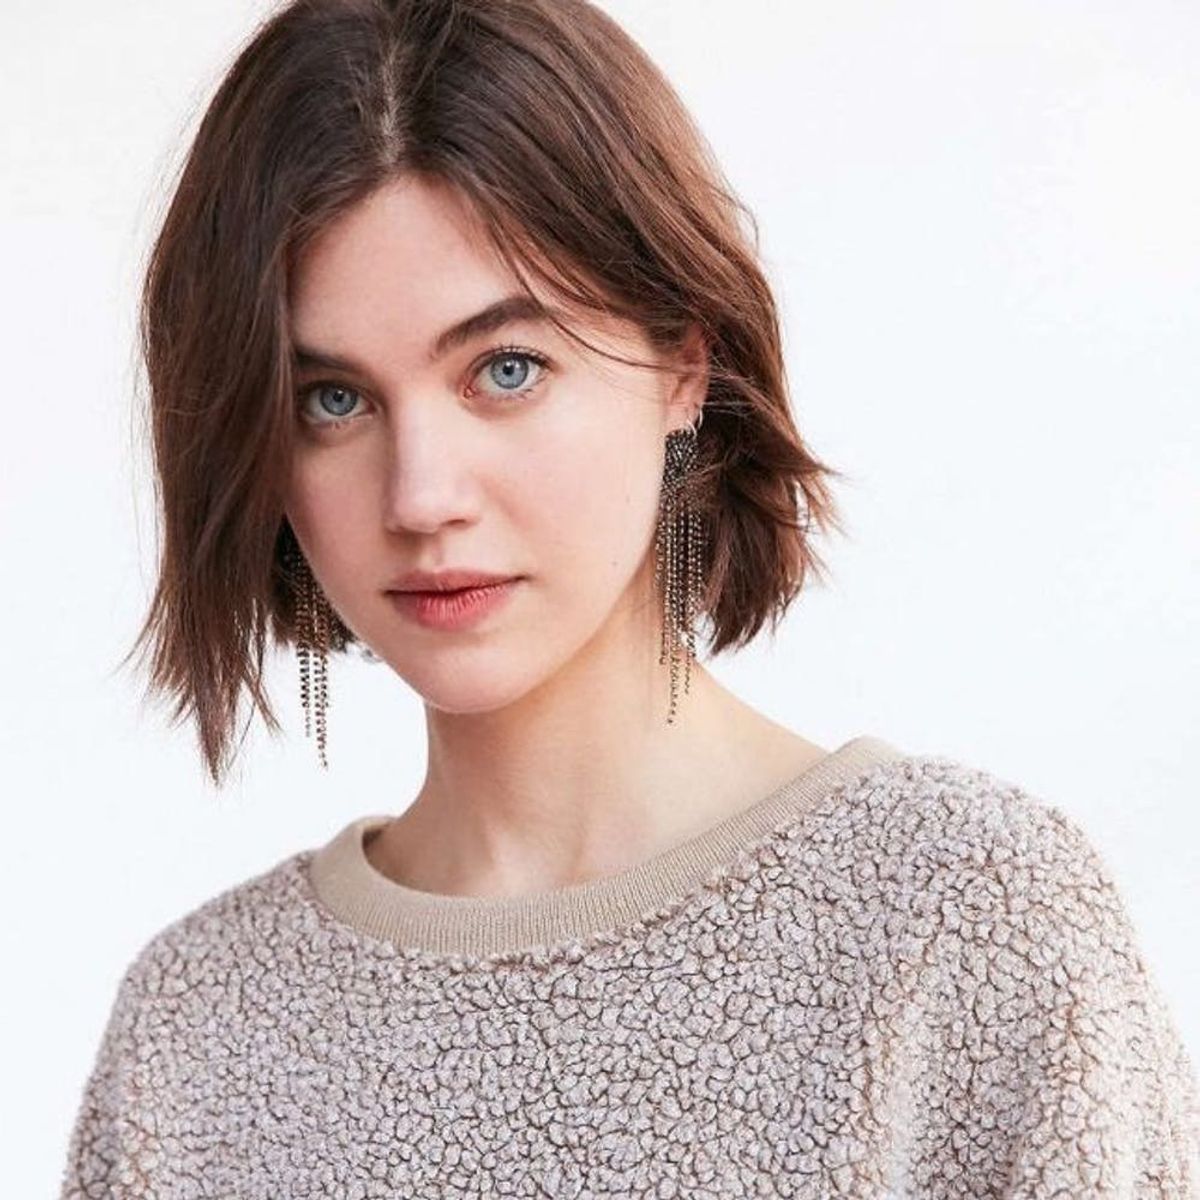 13 Stylish and Cozy Sweatshirts for When You Just Can’t Even